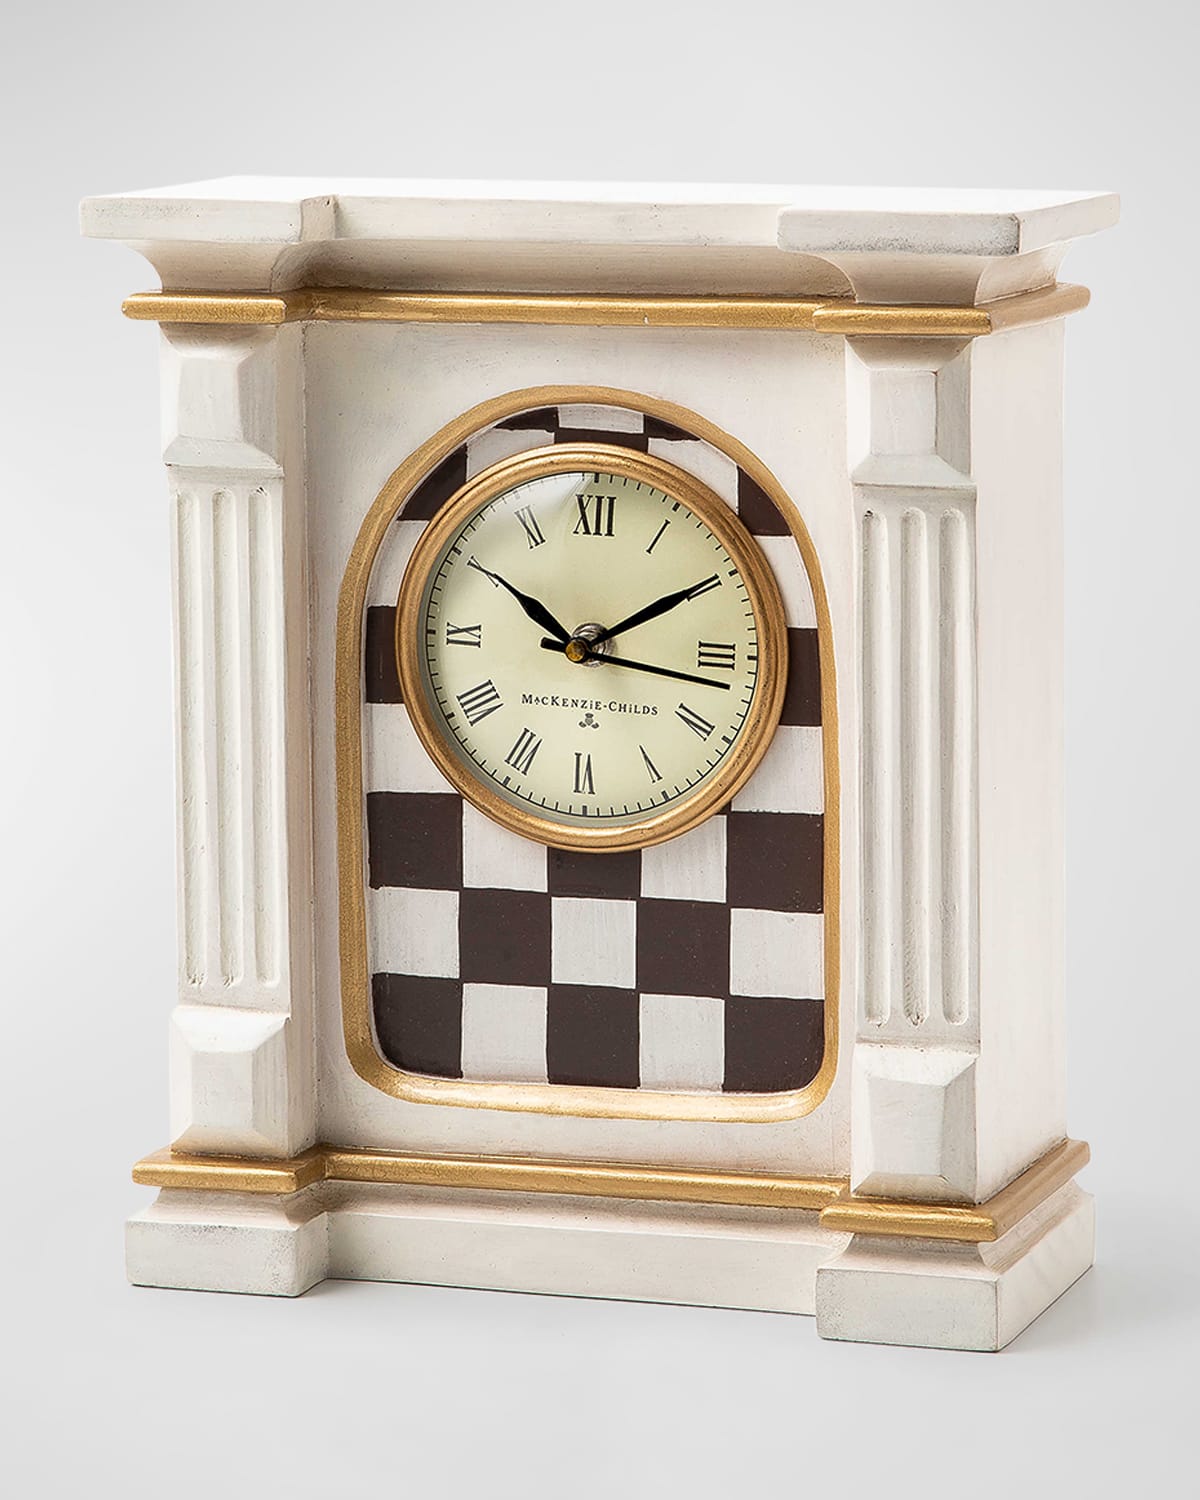 Mackenzie-childs Courtly Check Mantle Clock Light Stain